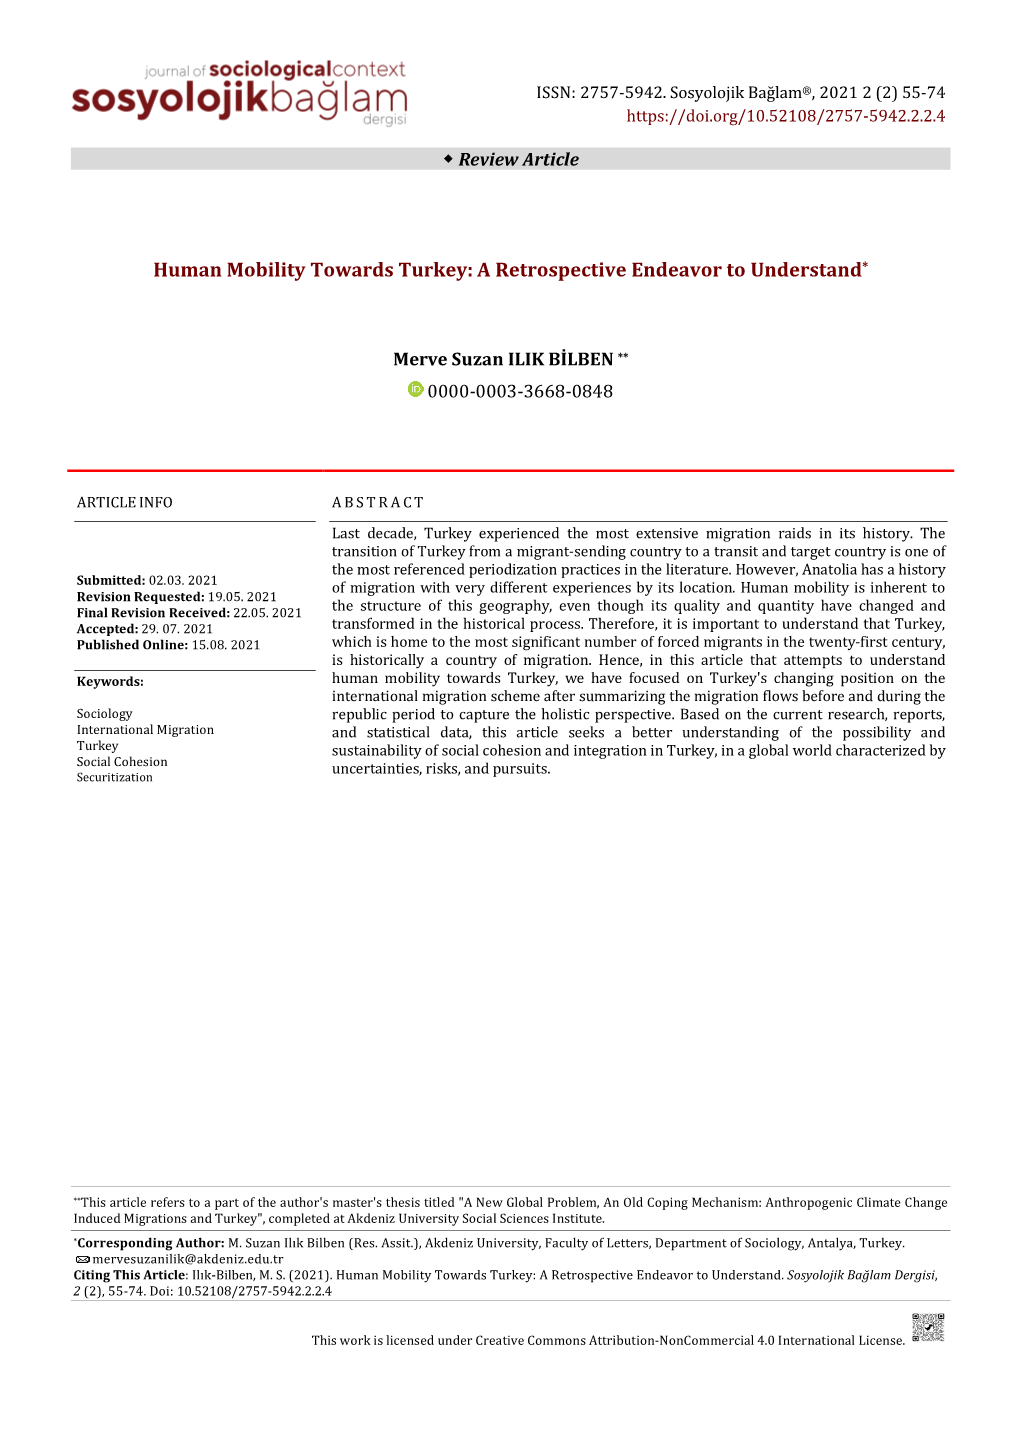 Human Mobility Towards Turkey: a Retrospective Endeavor to Understand*